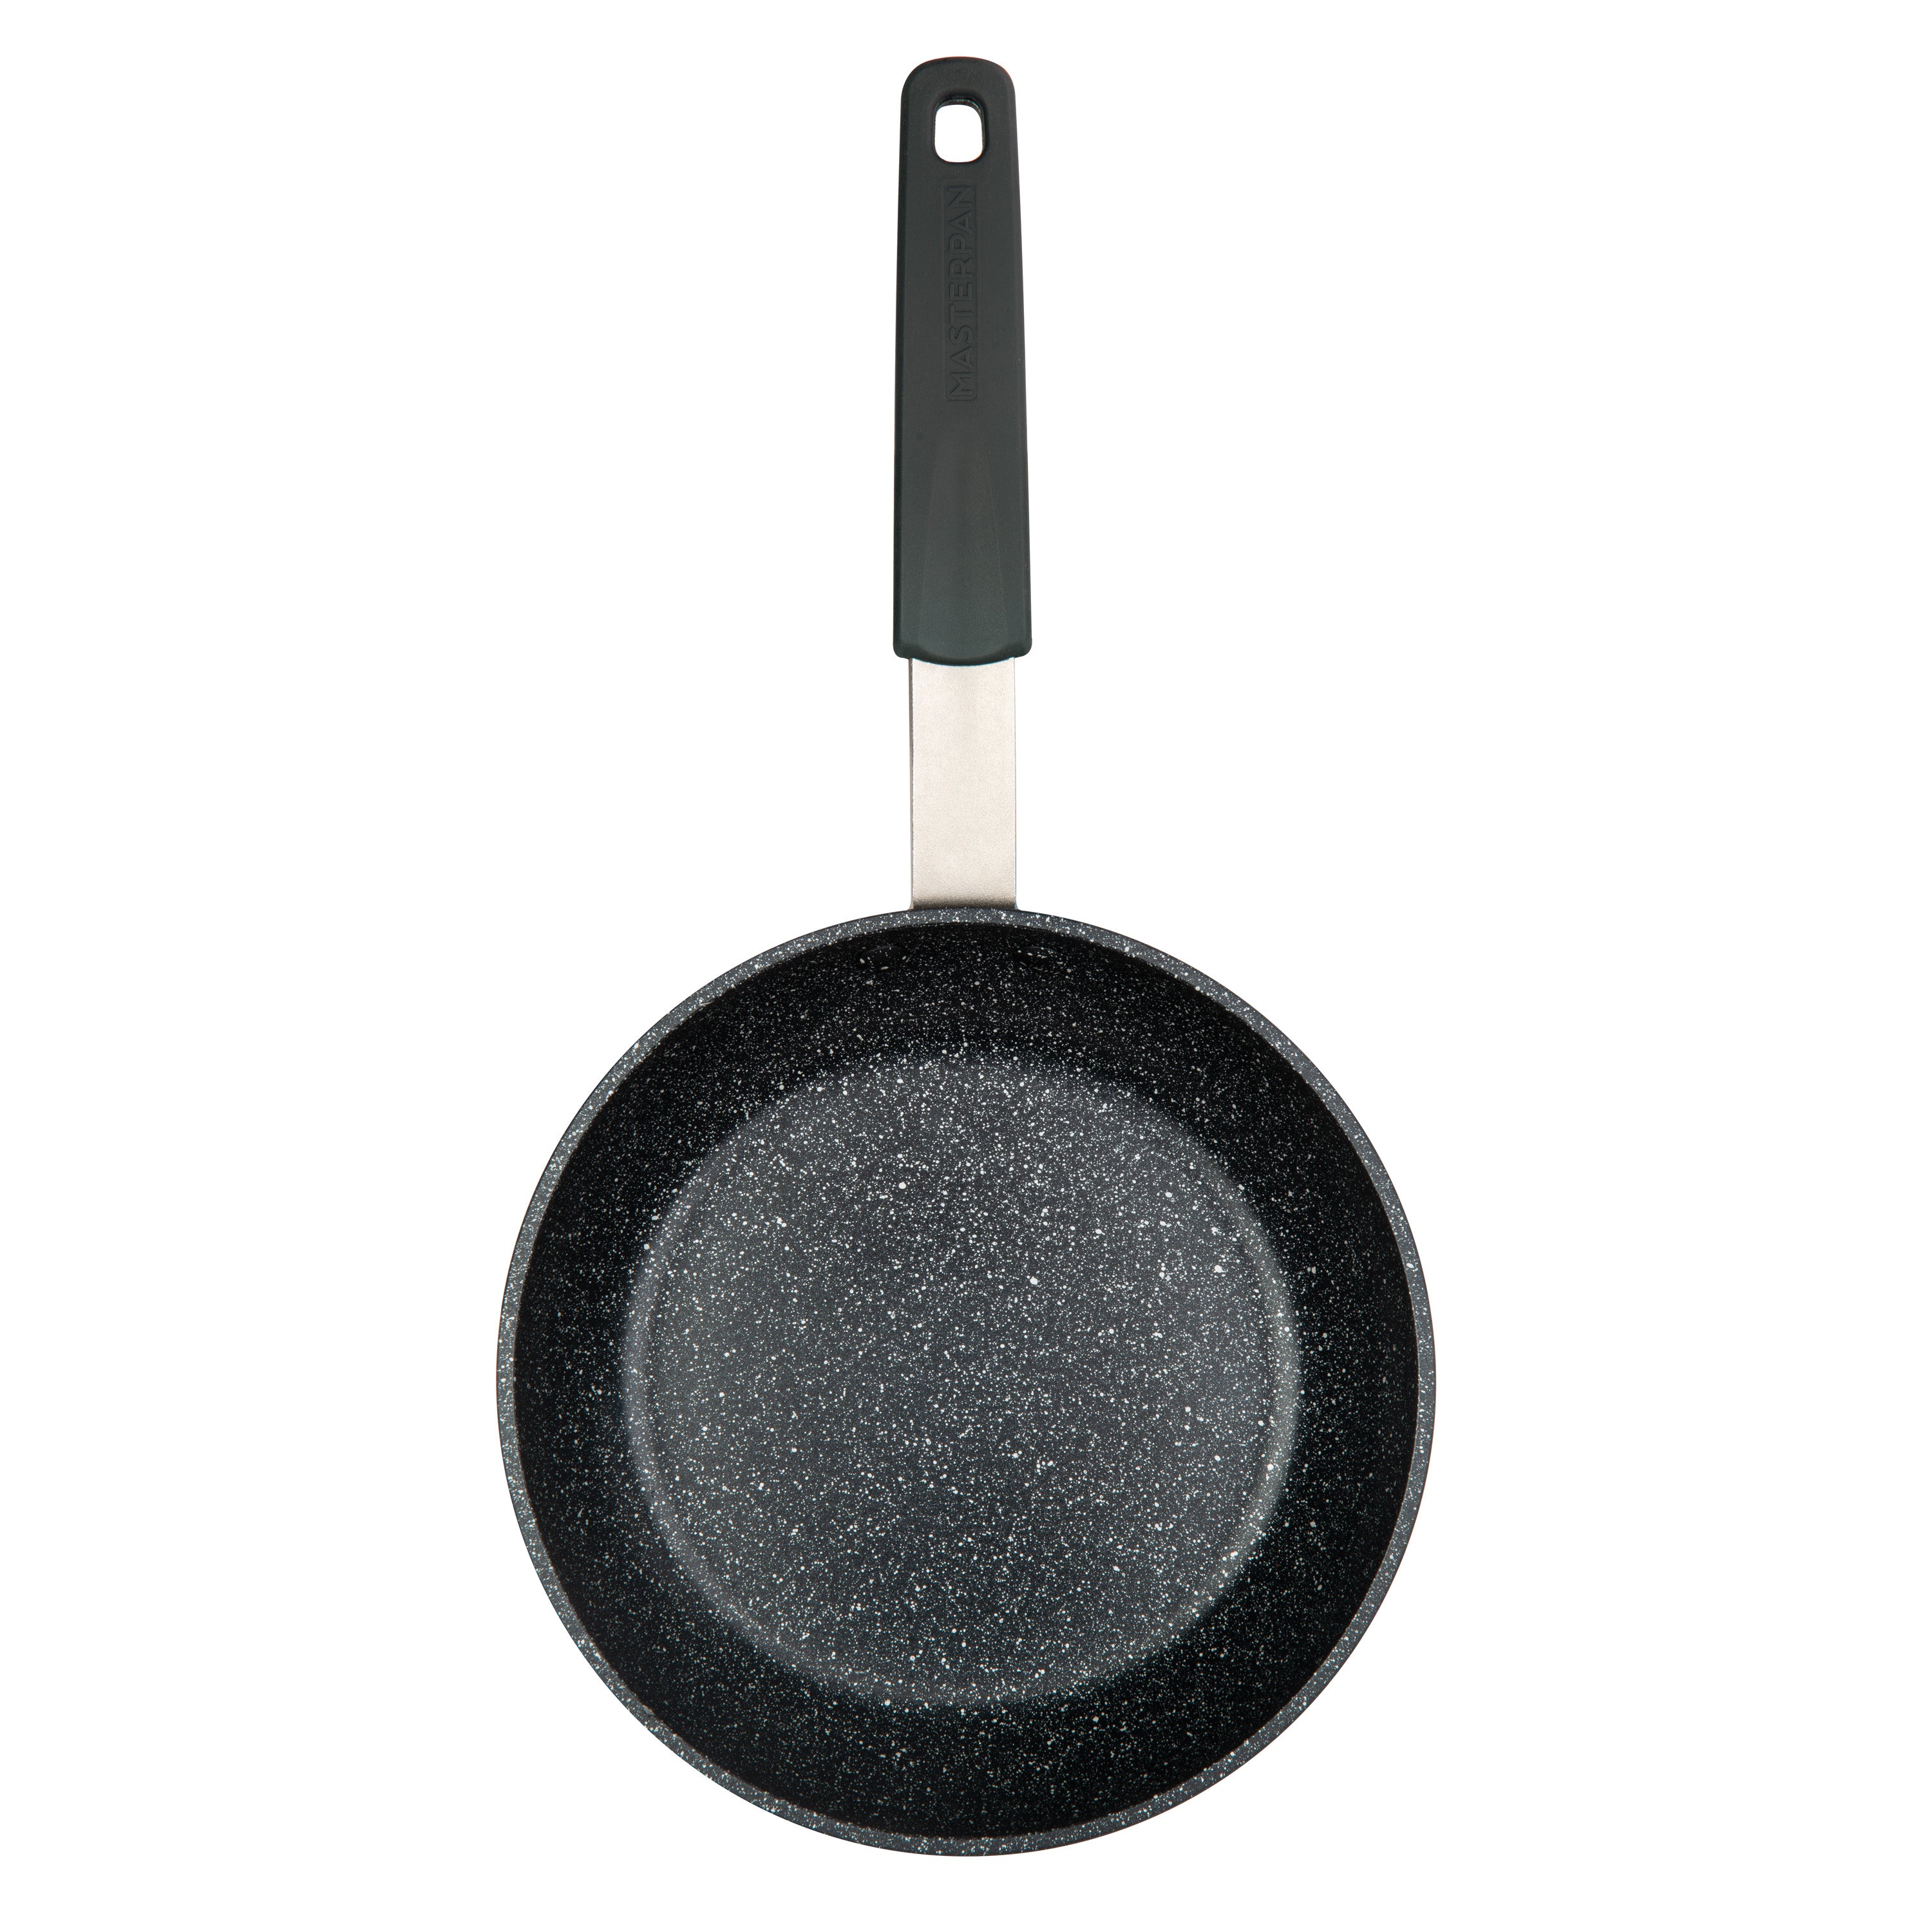 MASTERPAN Nonstick Frypan & Skilletwith Chefs Handle, 9.5